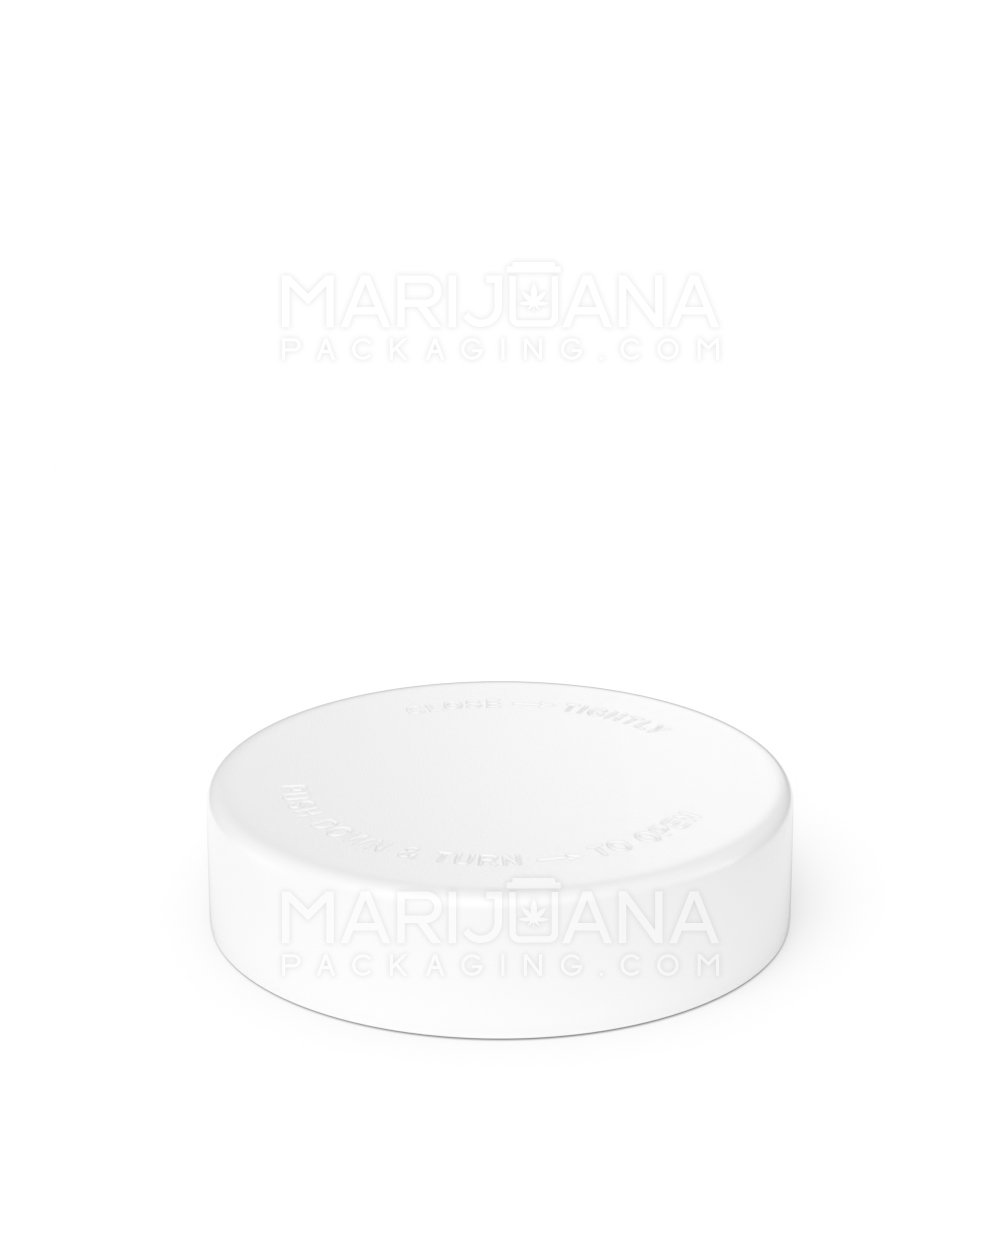 Child Resistant | Smooth Push Down & Turn Plastic Caps w/ Foam Liner | 57mm - Semi Gloss White - 72 Count - 3